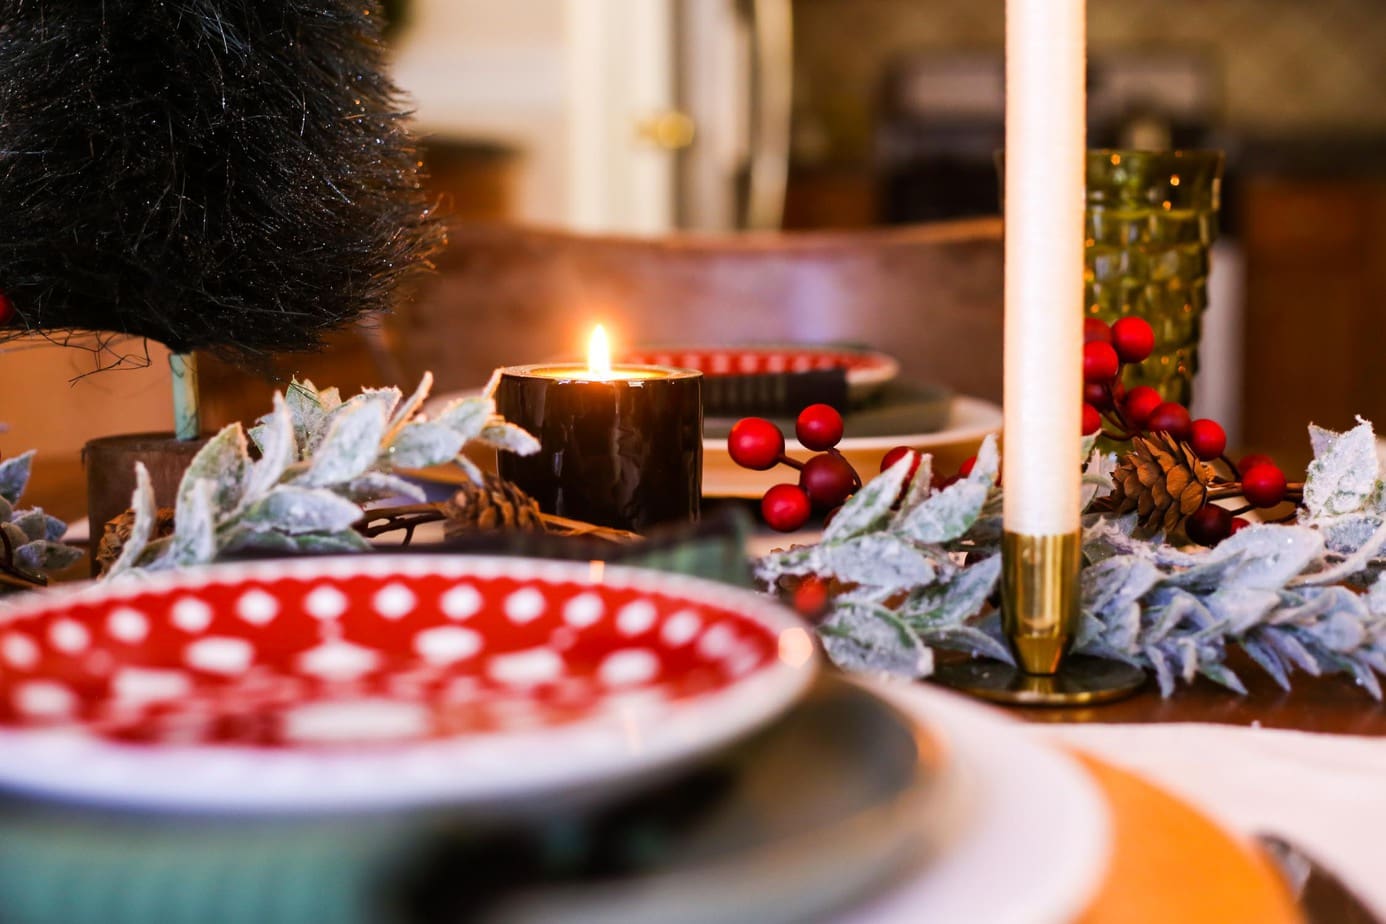 A charming Christmas table, with traditional red and green decor